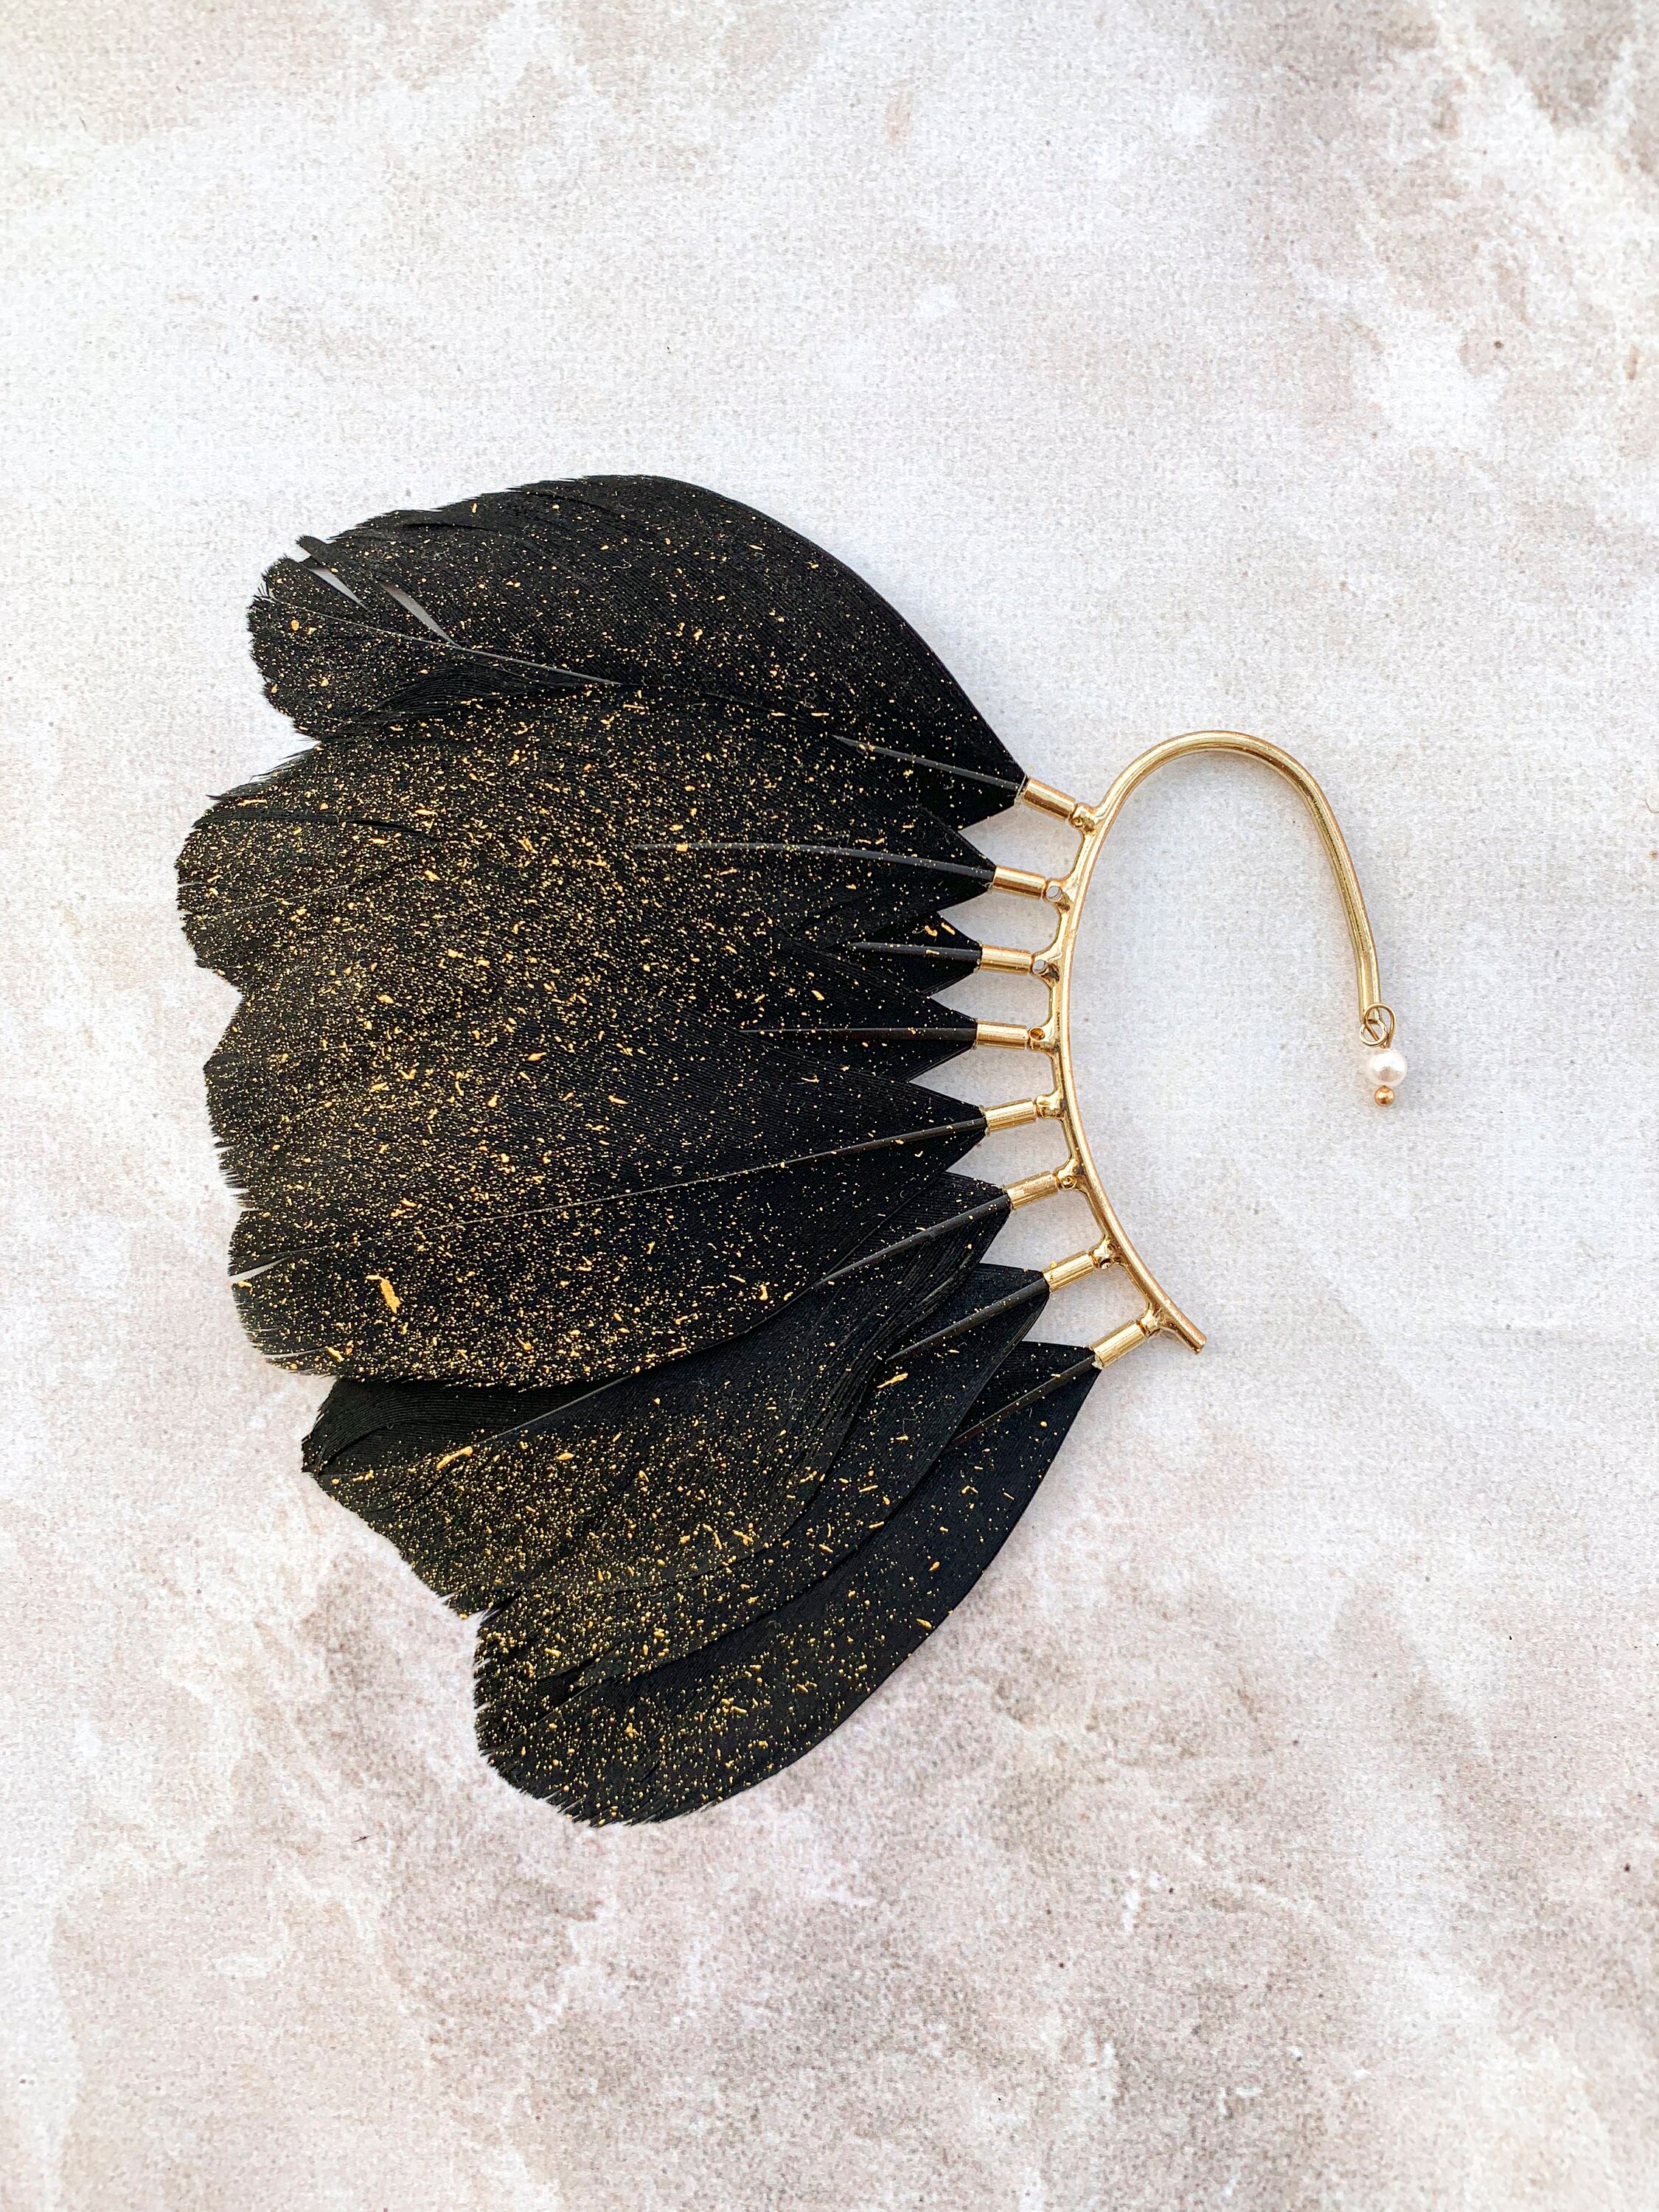 Hair Feathers. Black Feathers on Clip. Man's Feathers. Feather Hairpin.  Unisex Feather Accesories. Men's Feathers for the Hair. Indean Style 